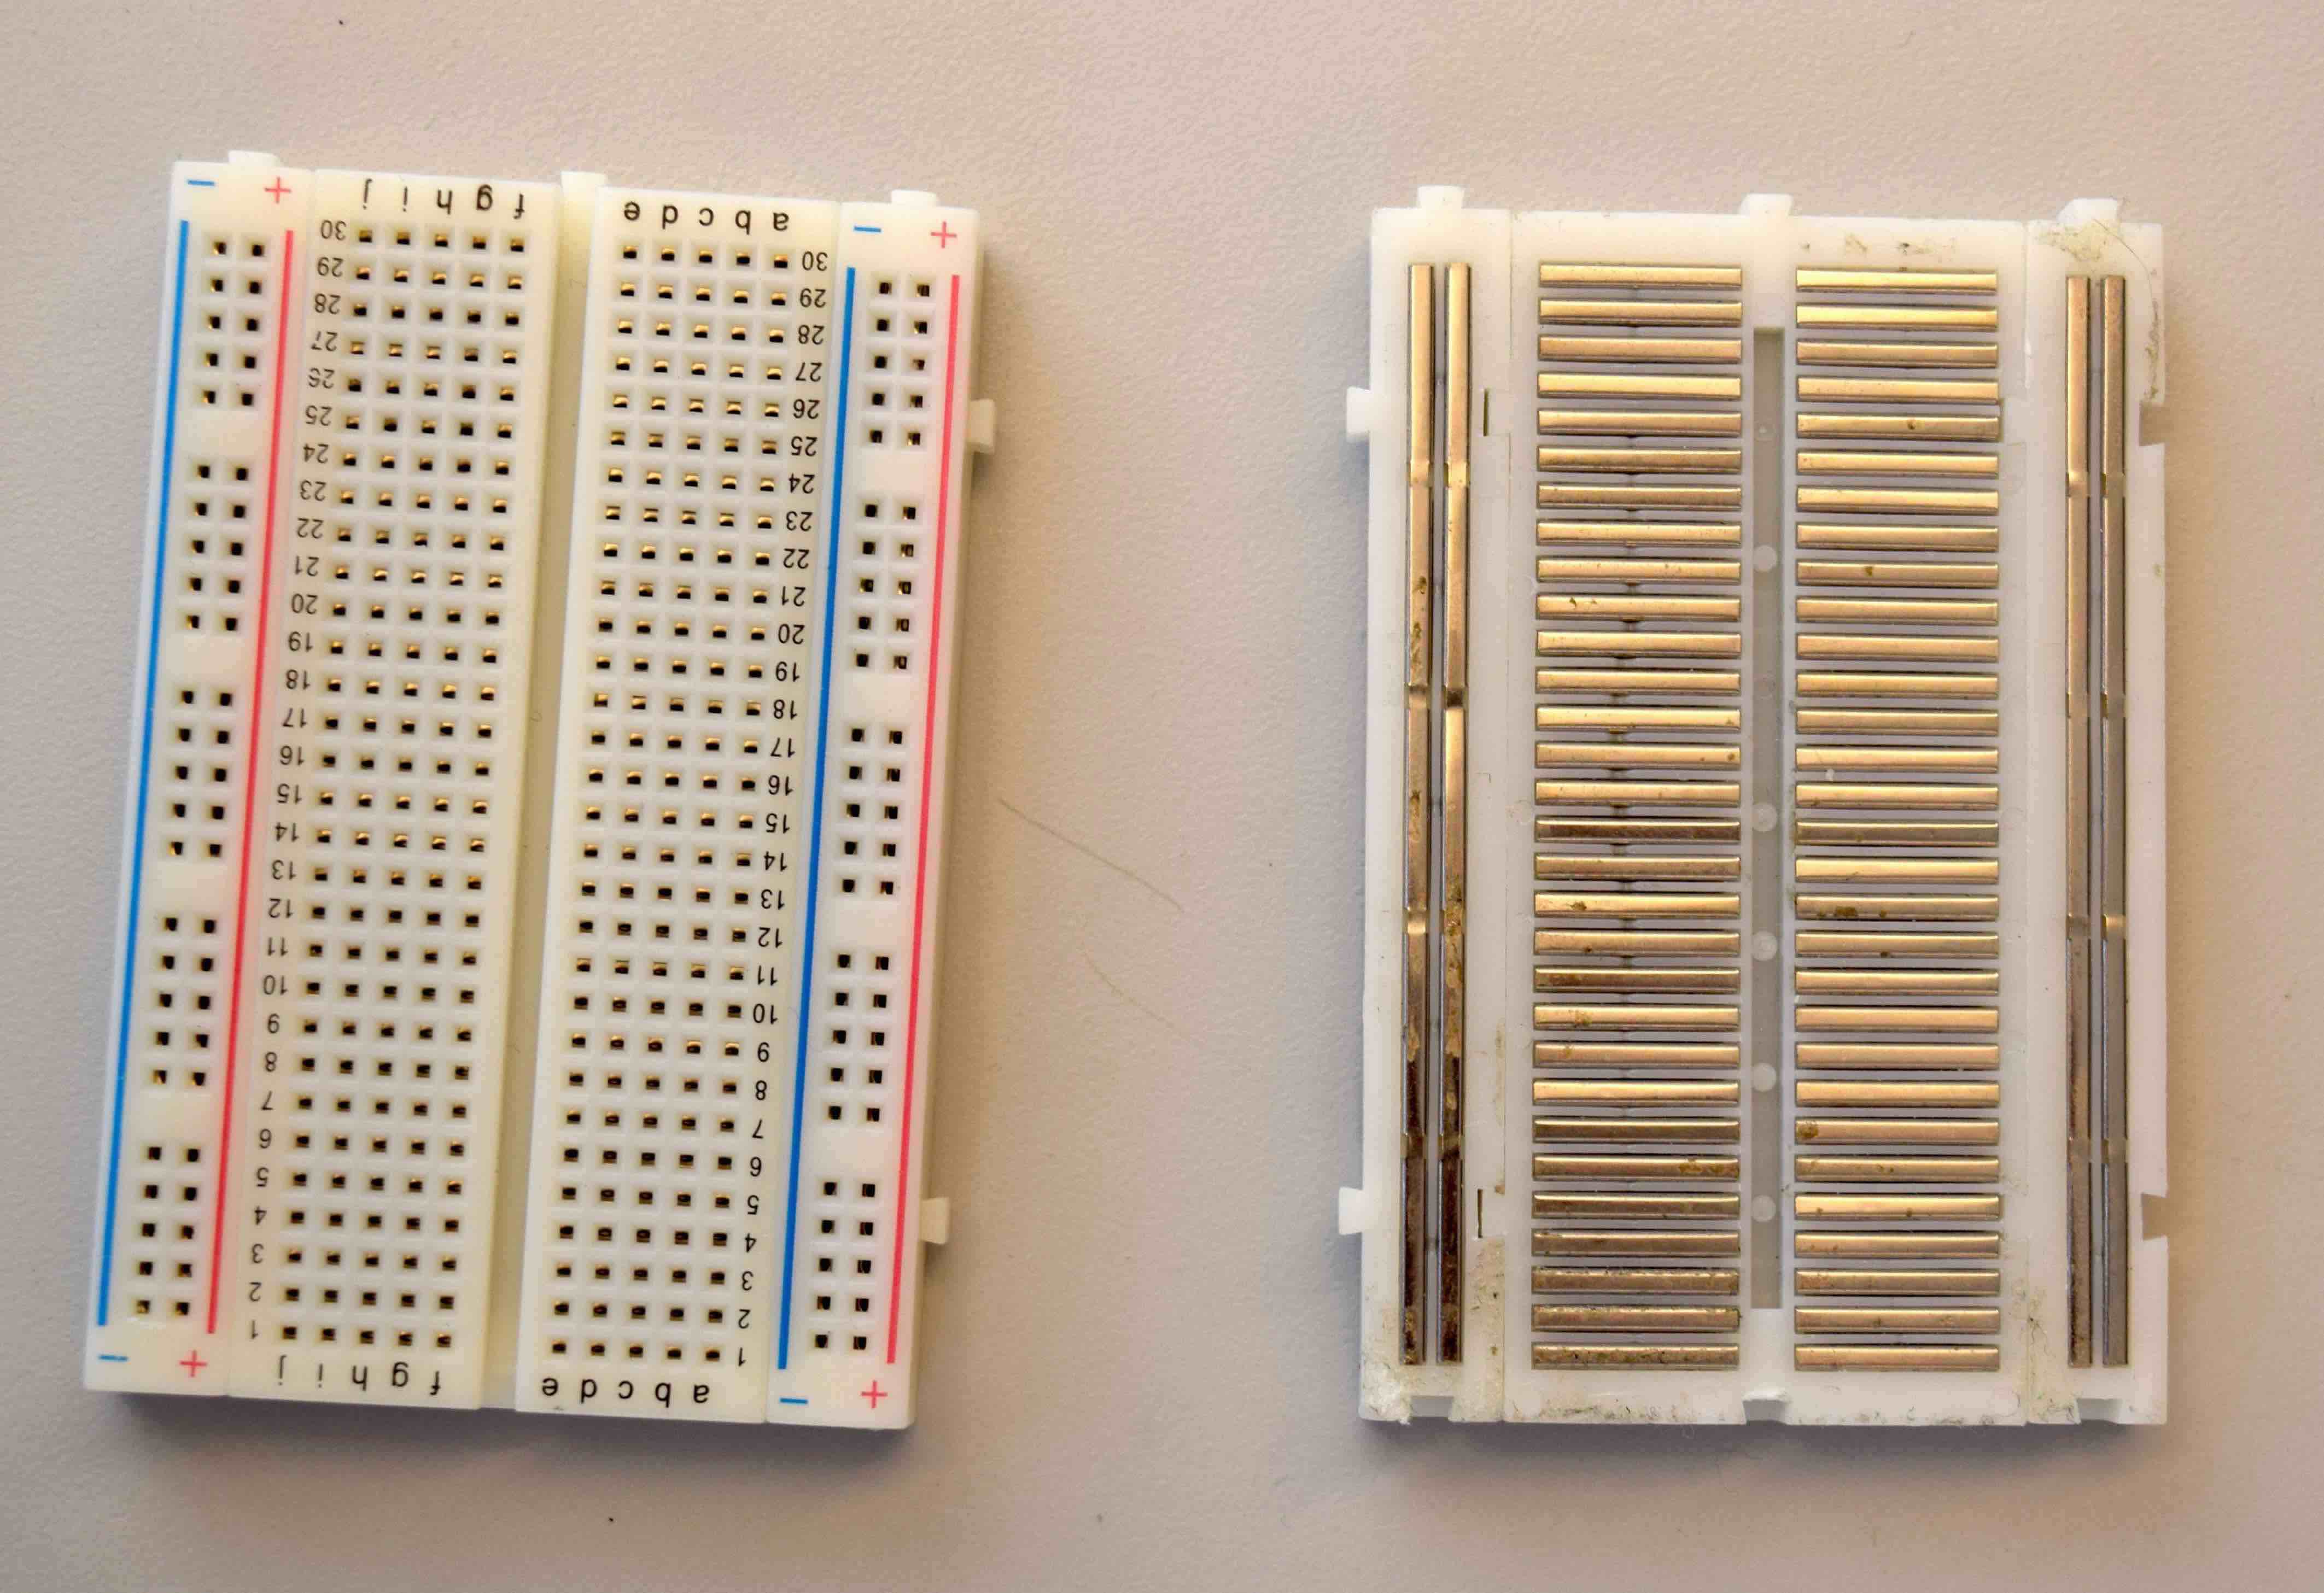 How breadboard rows and columns are connected.